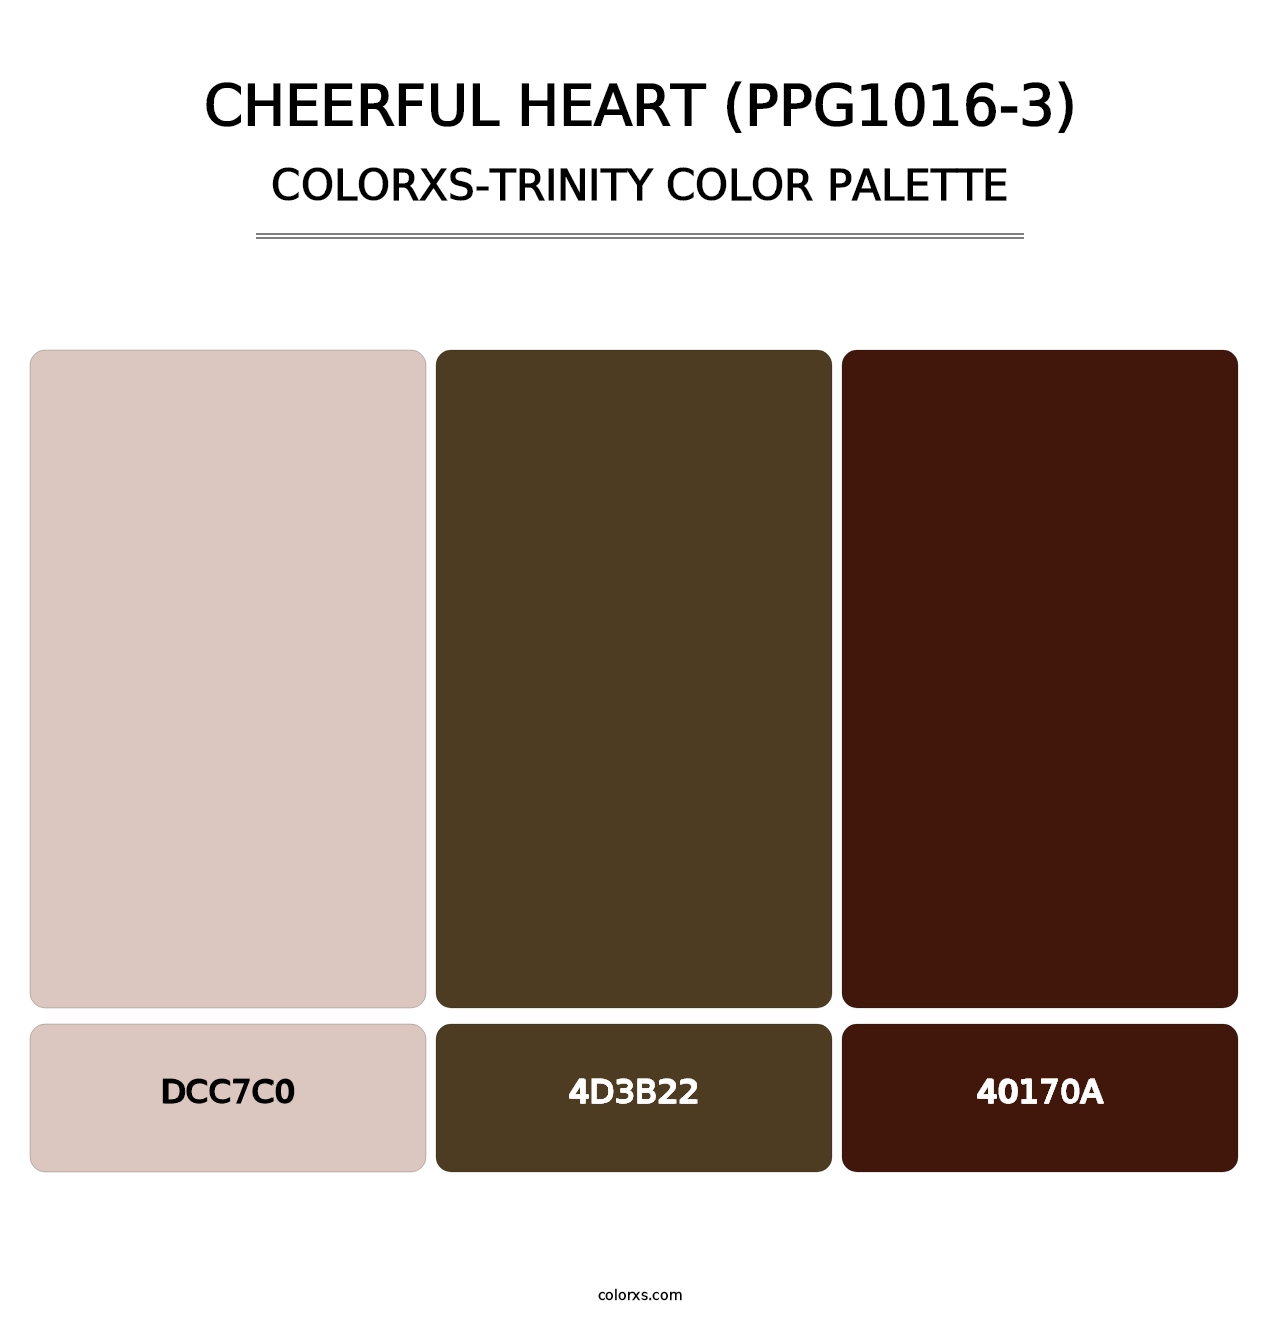 Cheerful Heart (PPG1016-3) - Colorxs Trinity Palette